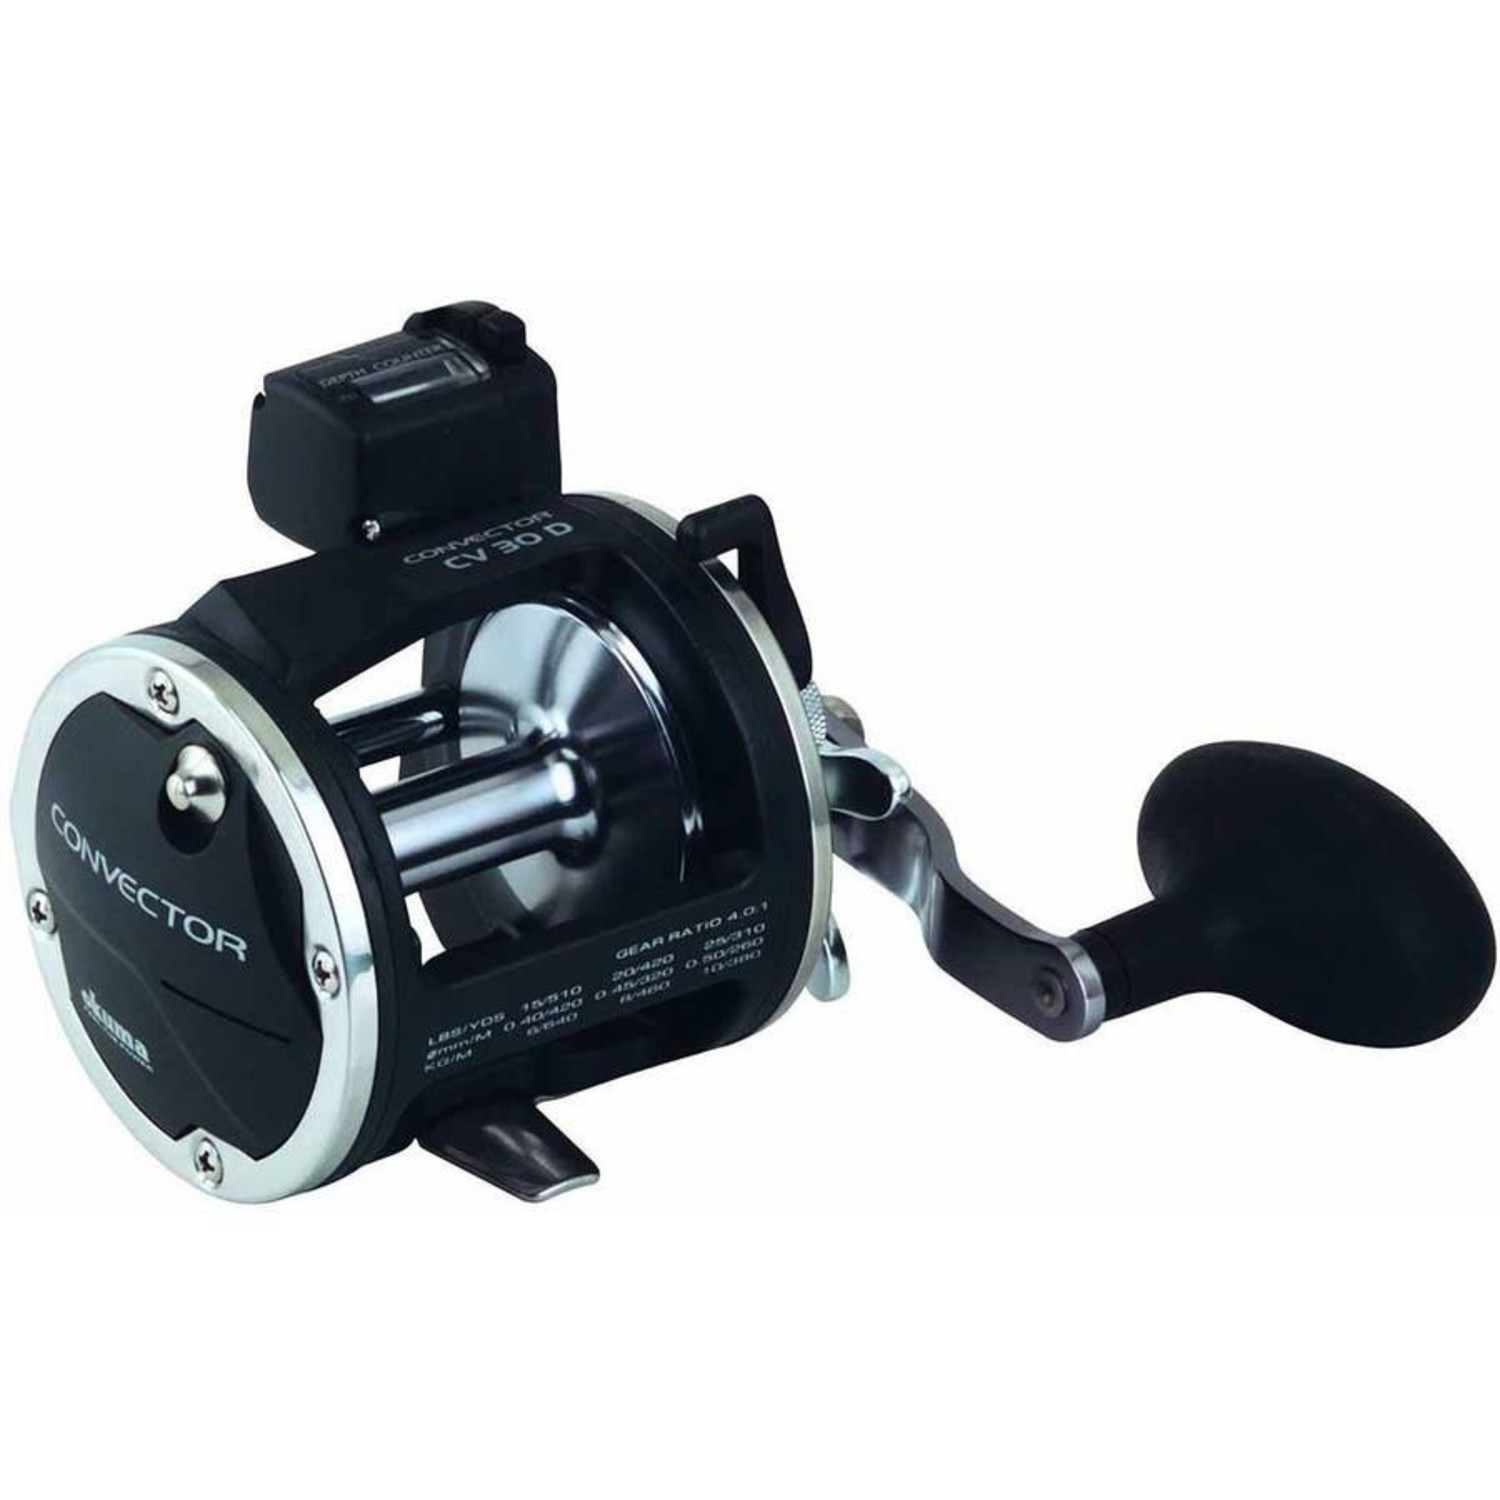 convector 20-size left hand linecounter reel - OutfitterSSM